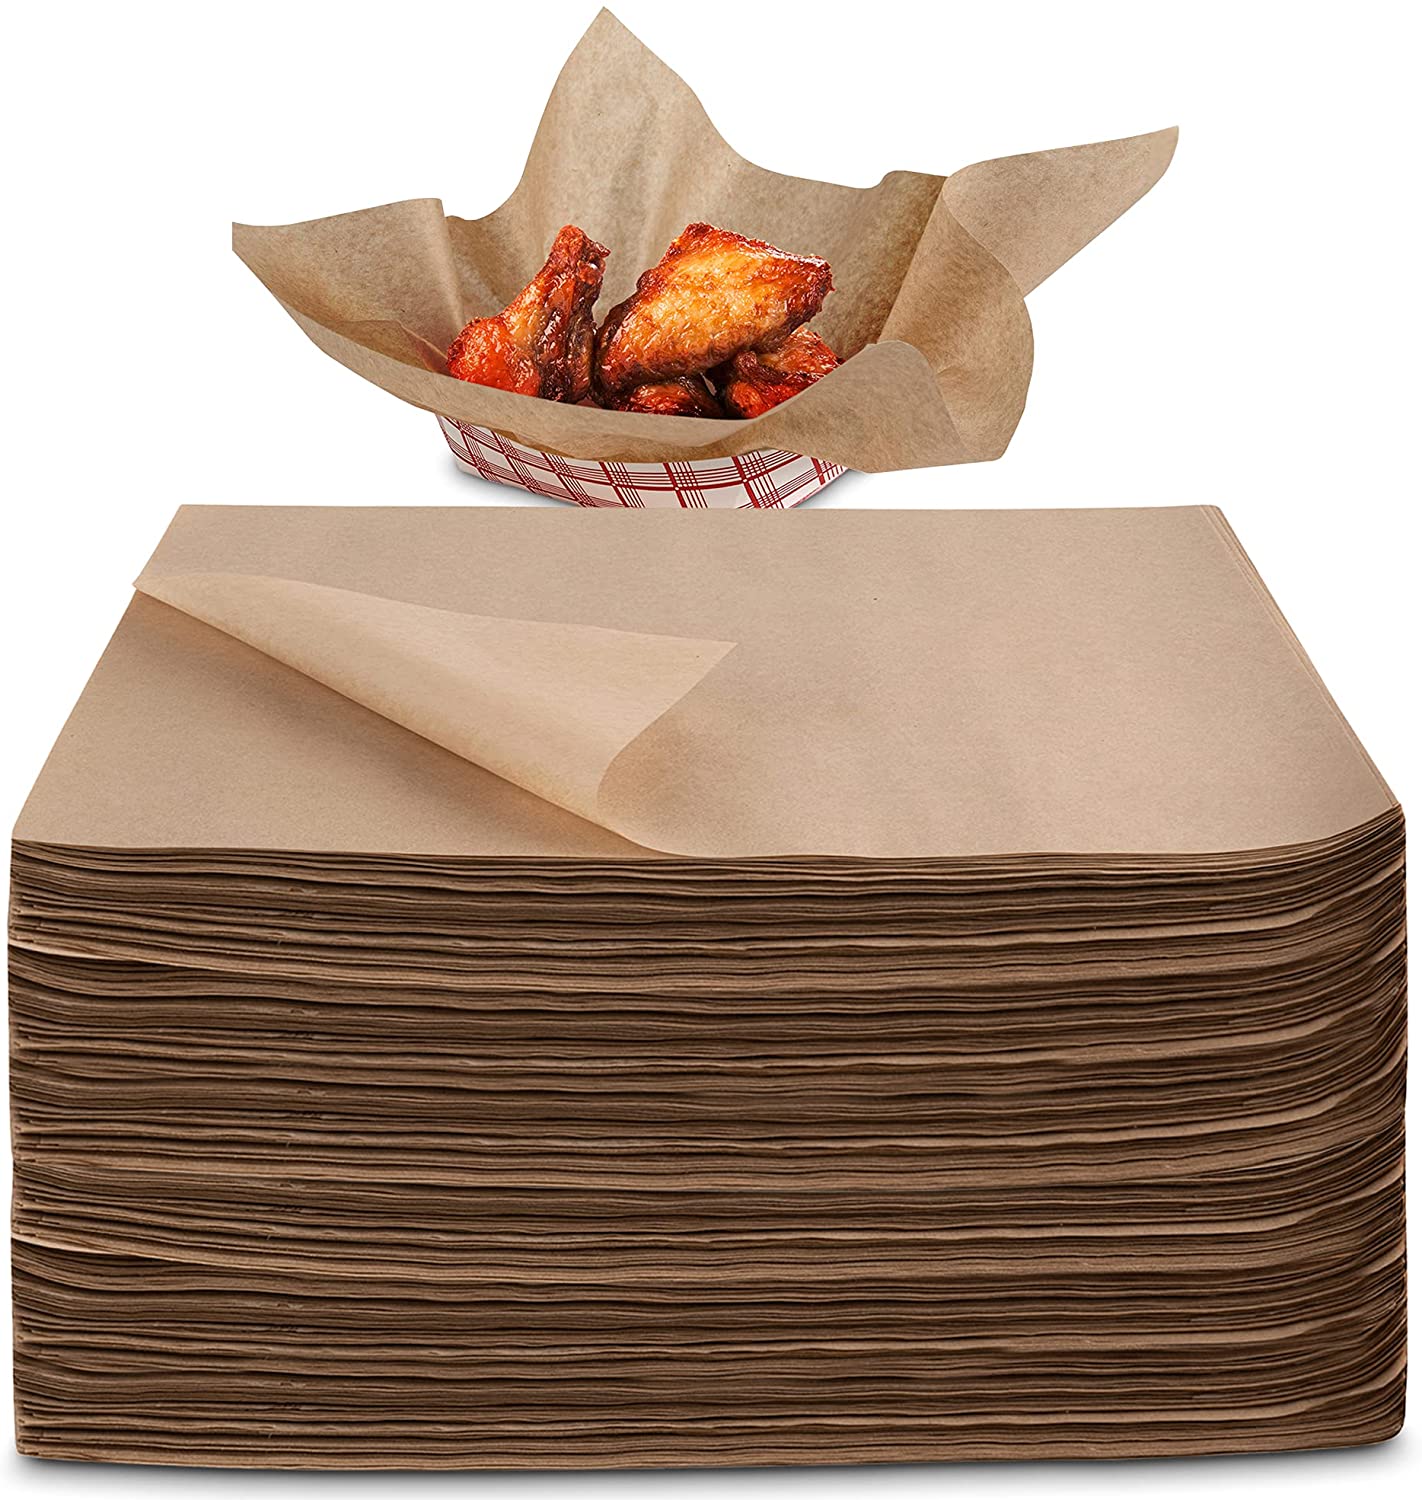 Stock Your Home 12 x 12 Grease Proof Deli Wrapper (500 Pack) - Pre Cut